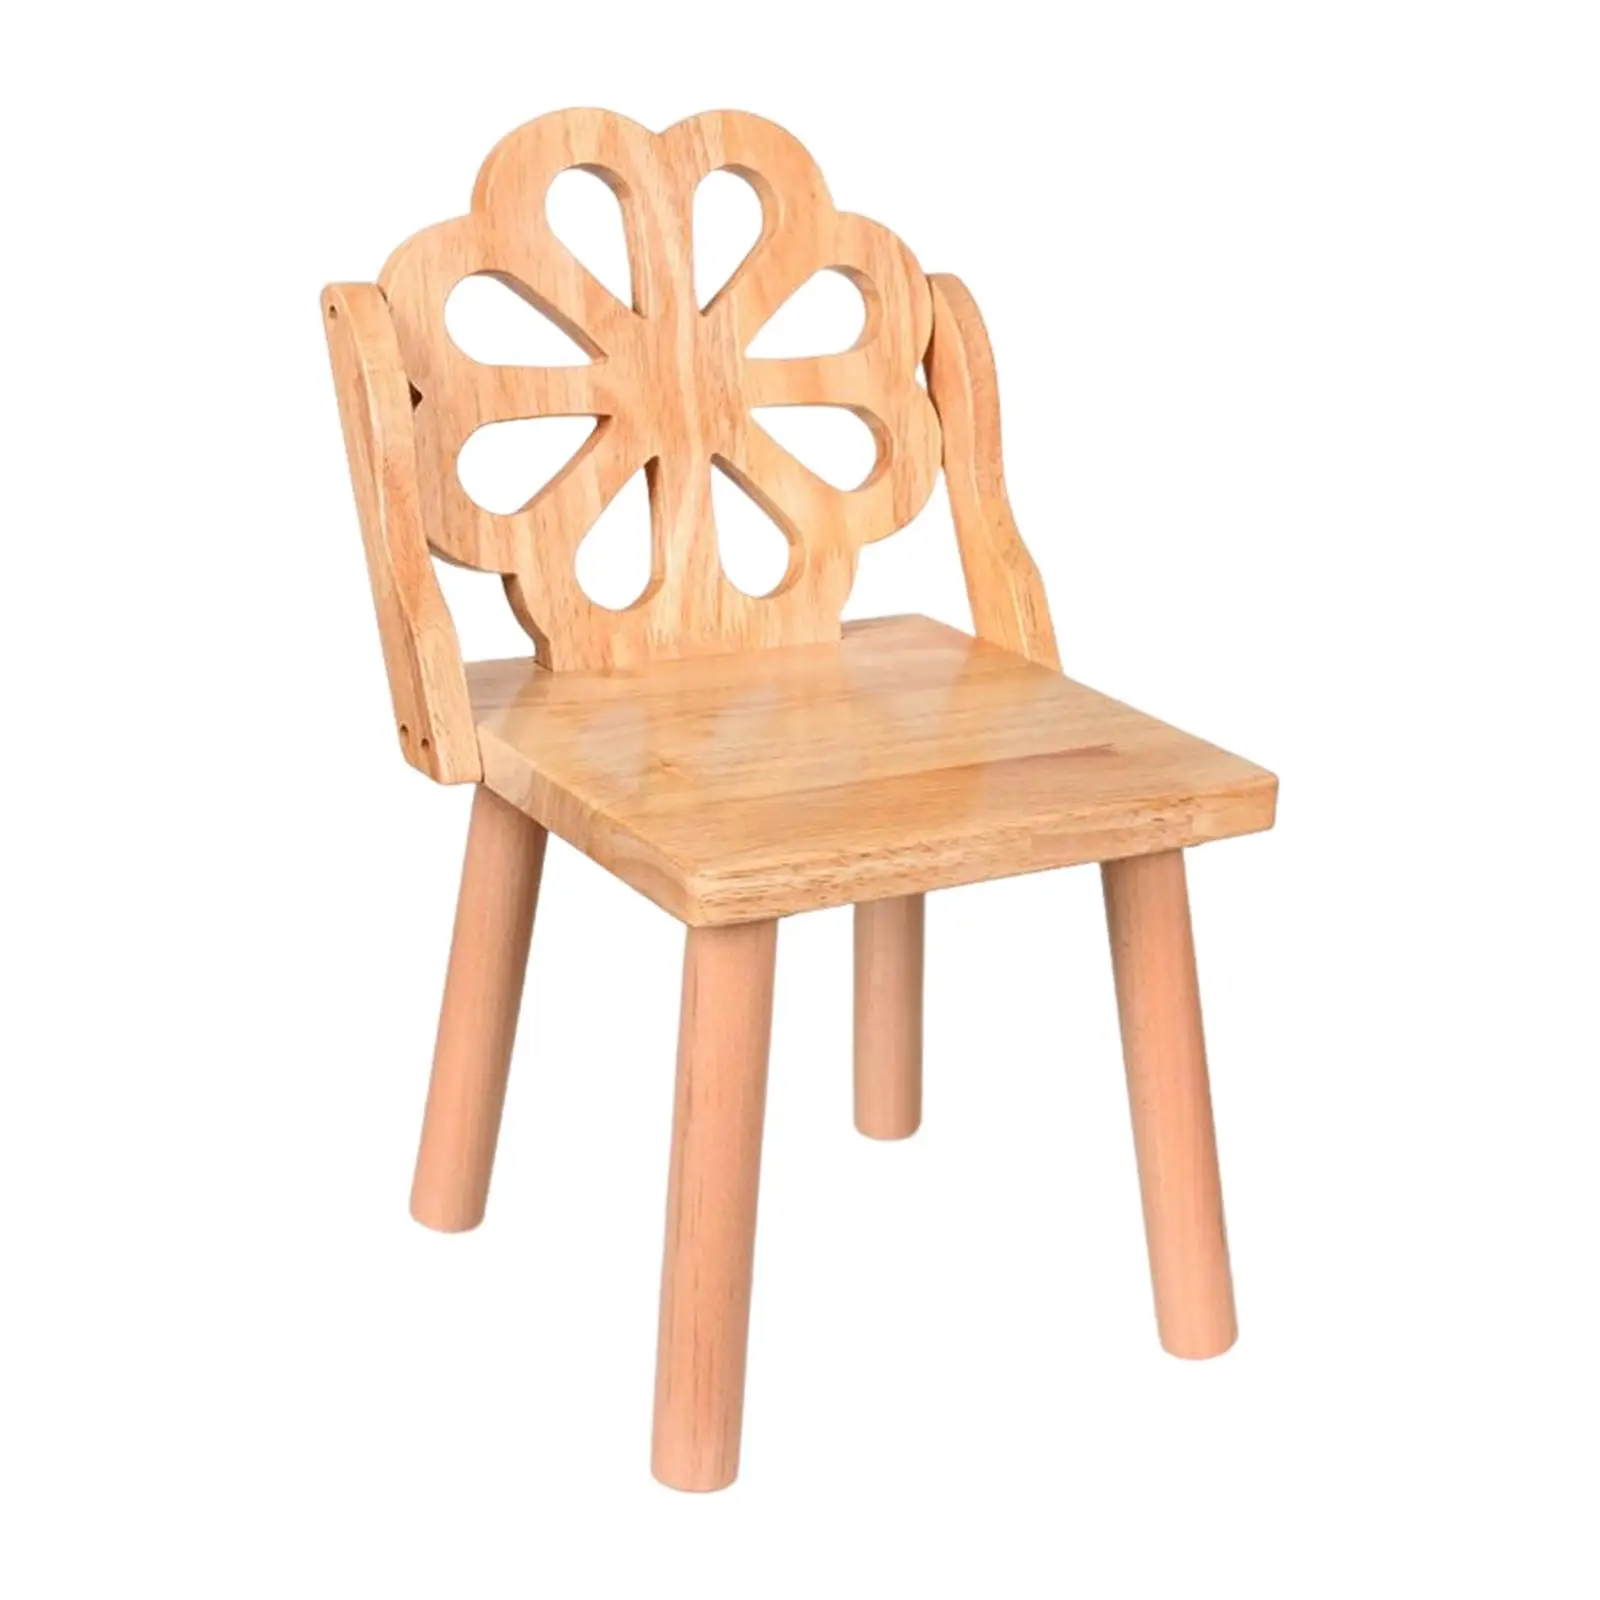 Wood Removable Wooden Child Stool Space Saving Ultralight Small Seat Stool for Kids